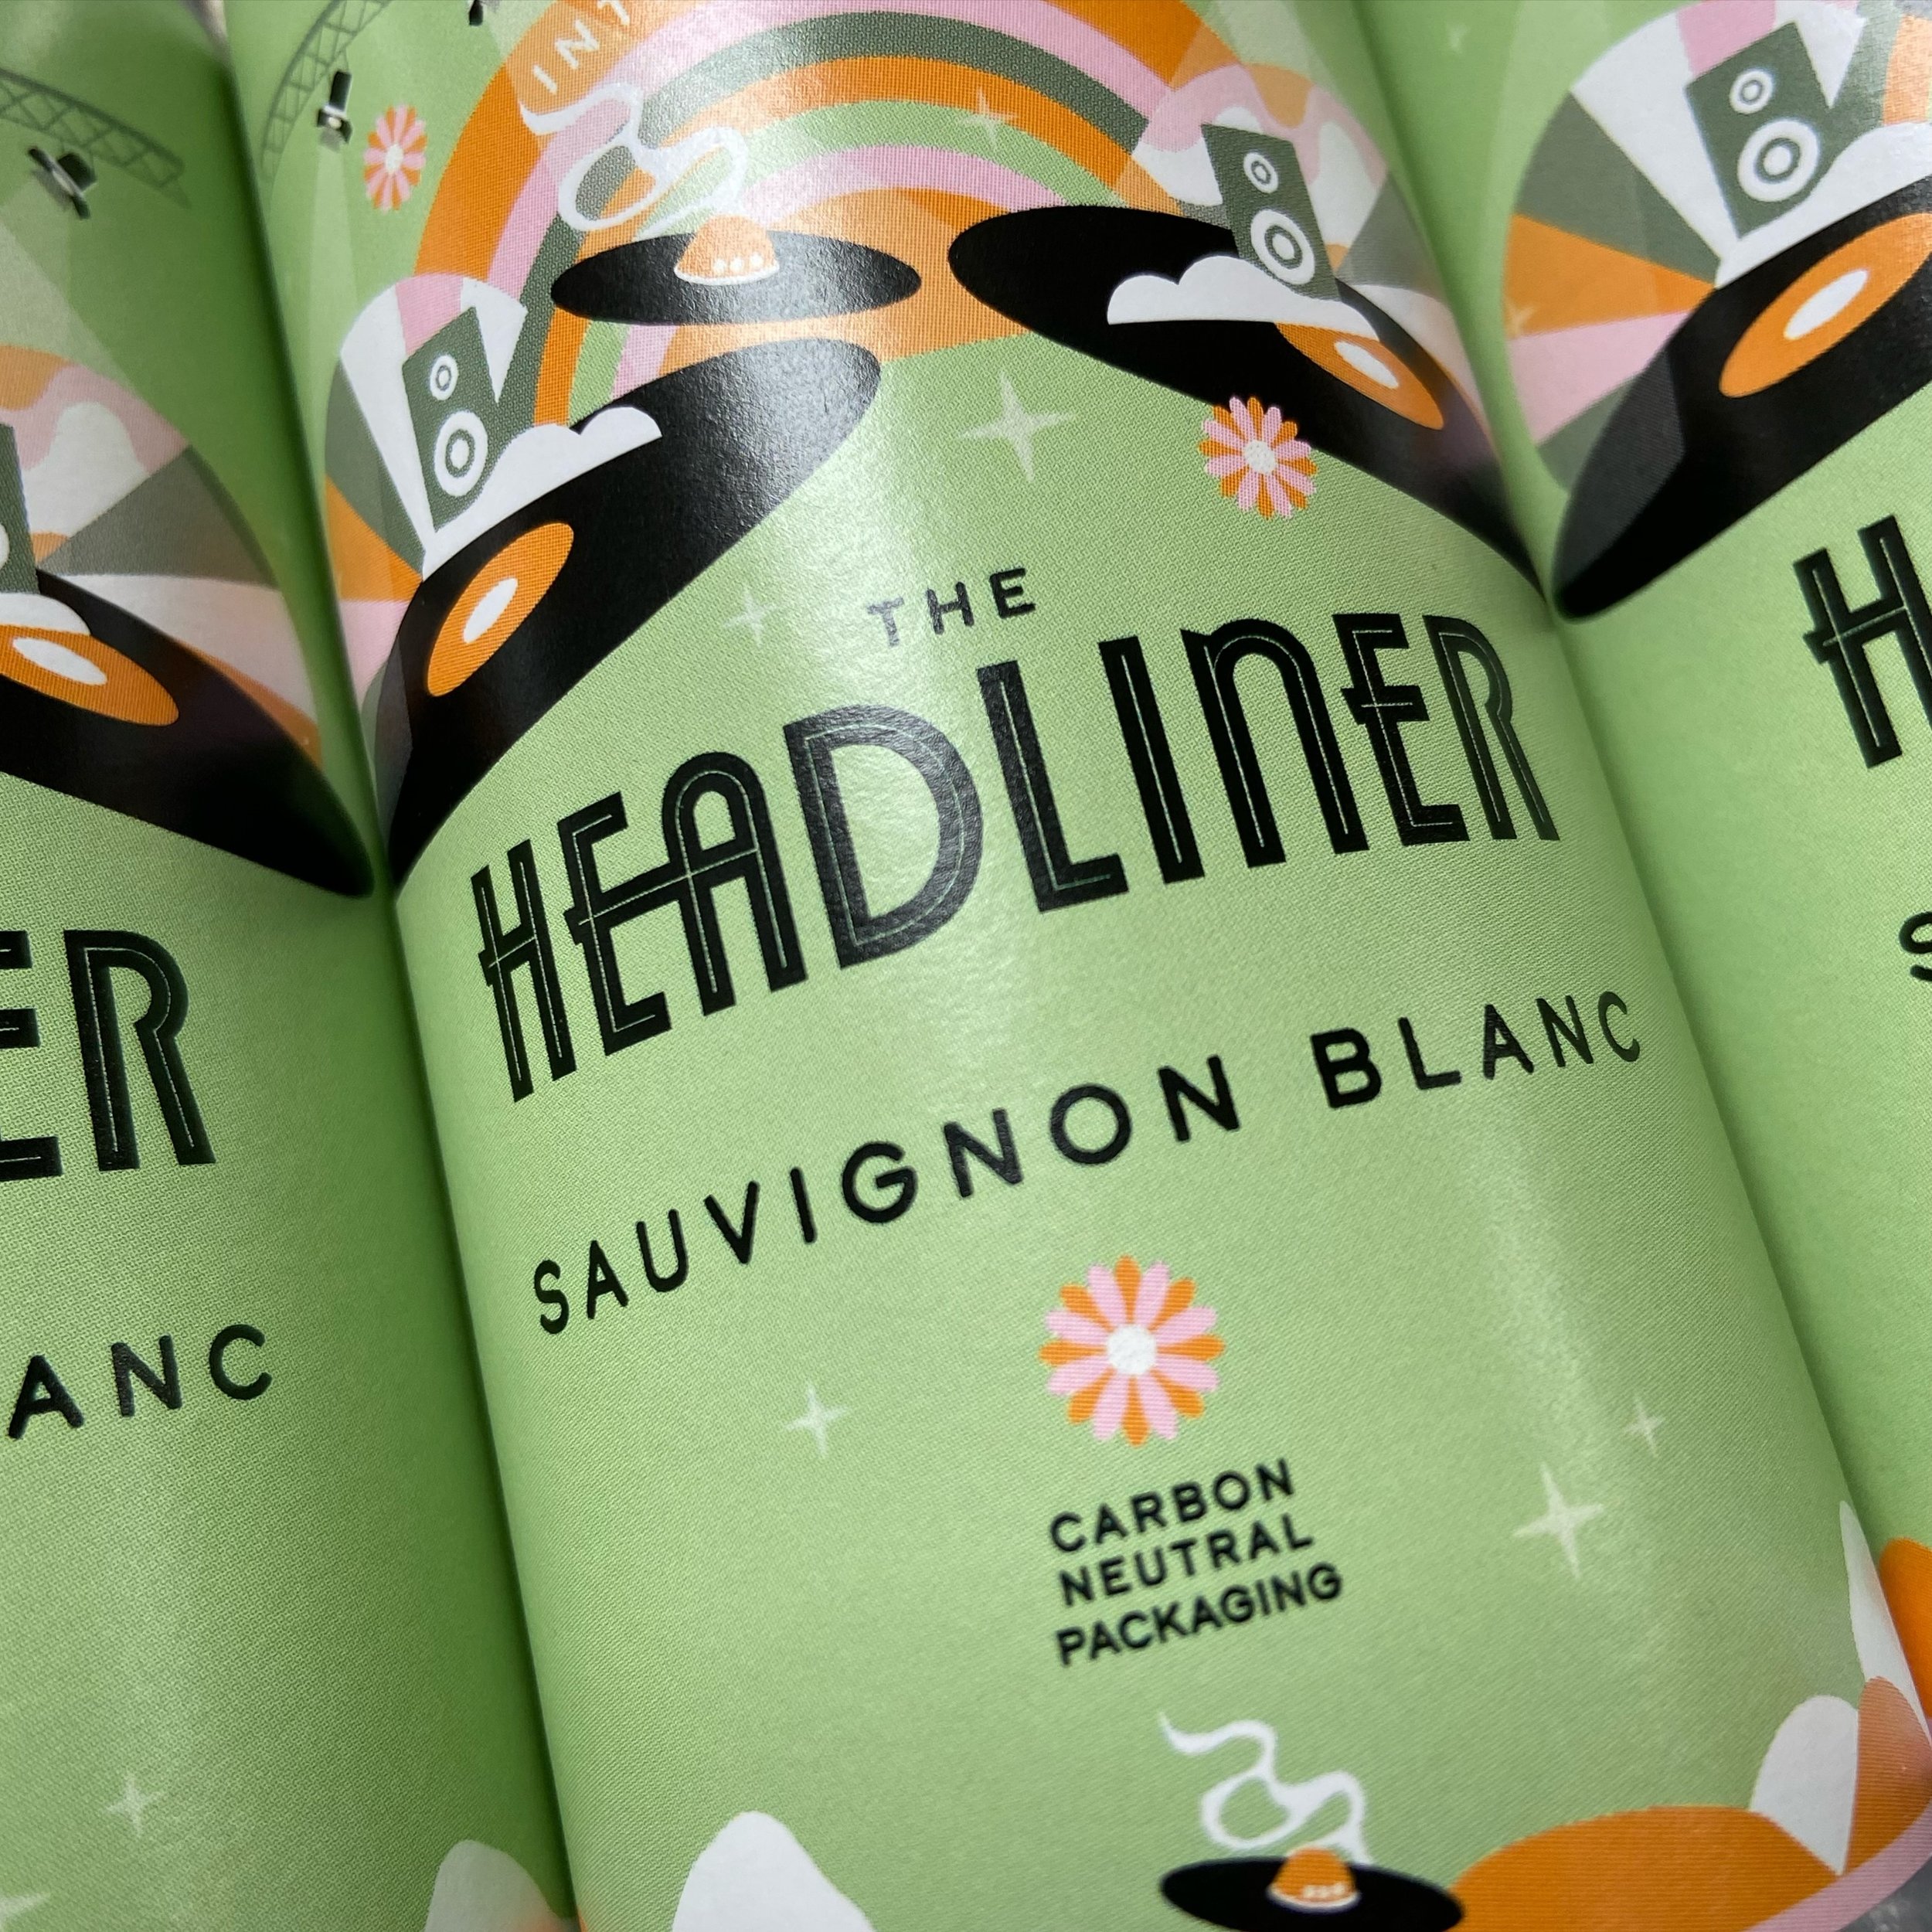 Cheers to you on National Sauvignon Blanc Day! The Headliner Sauvignon Blanc in a 187ml aluminium can is fresh and just off-dry. There are touches of tropical fruit and lots of zing about this elegant white wine!

#nationalsauvignonblancday #theheadl